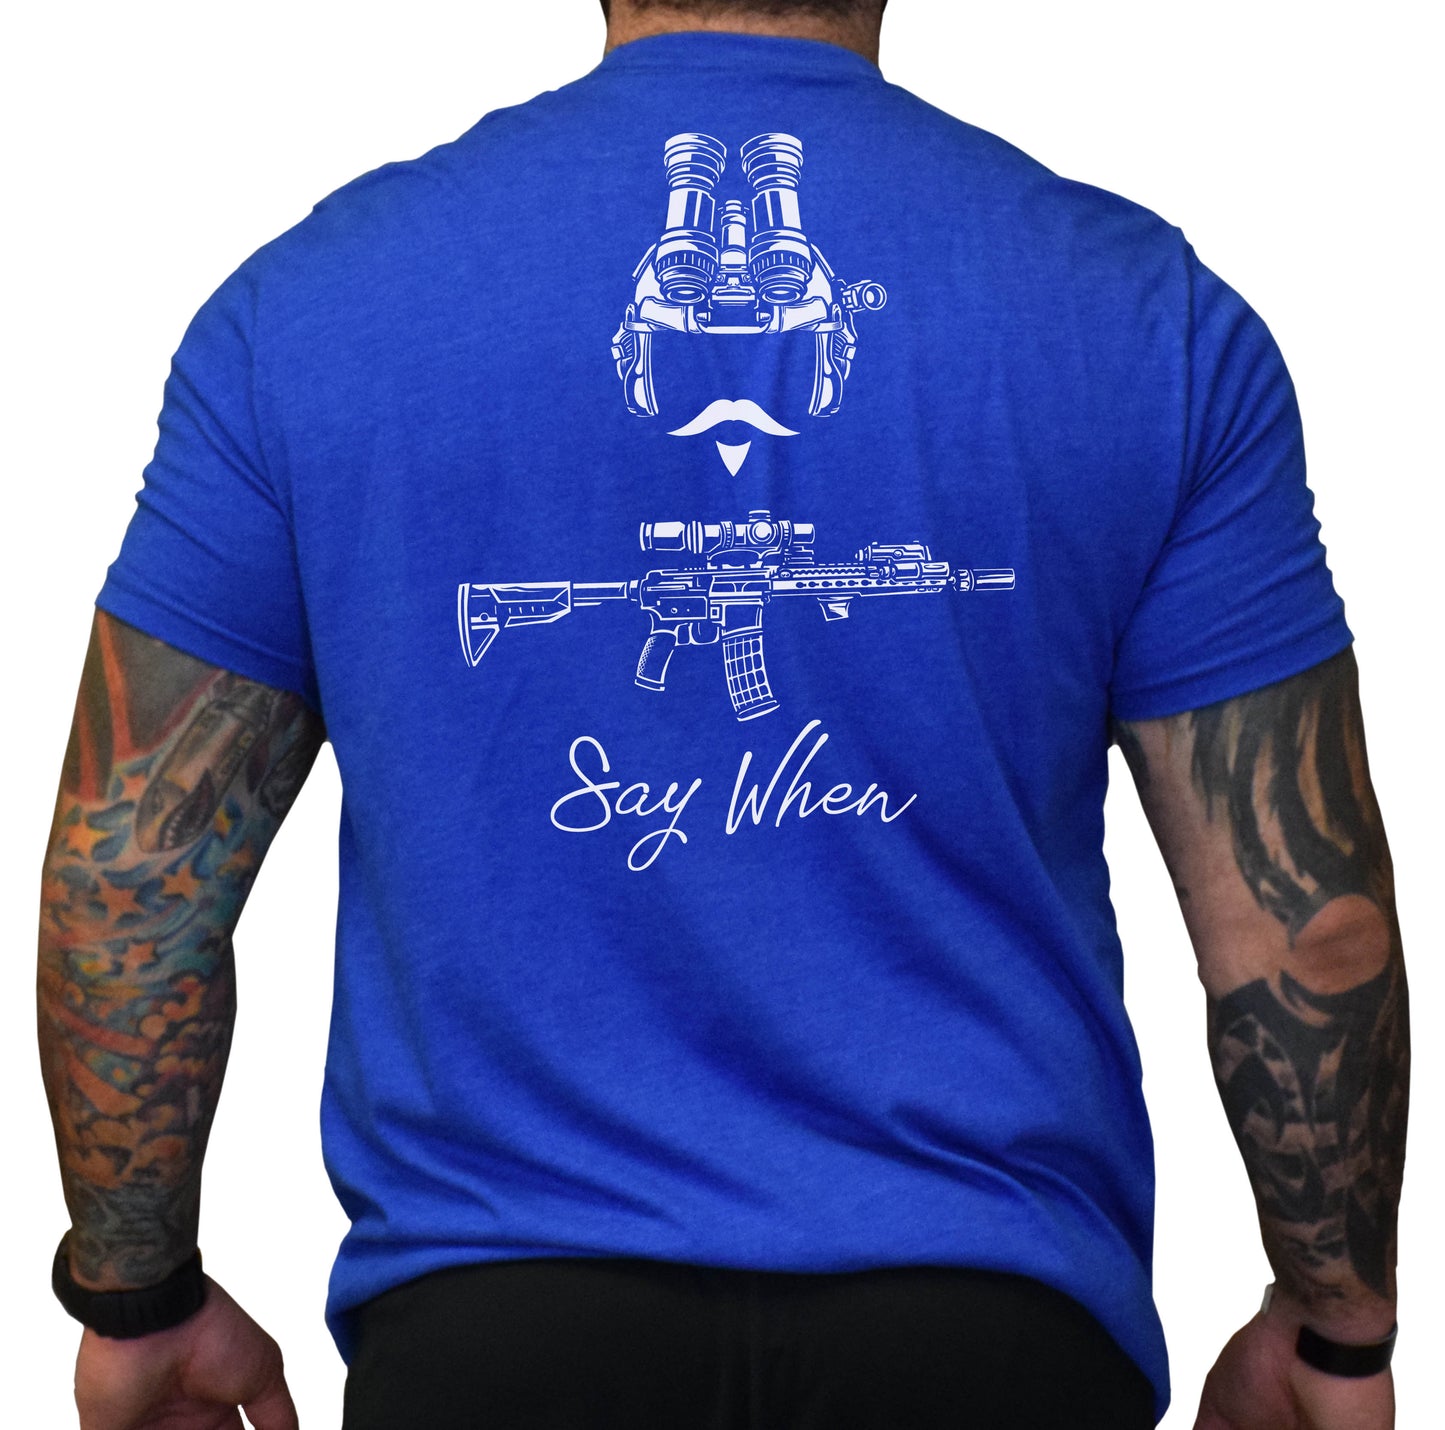 The Gentleman Operator  "I'm your huckleberry" Front and back logo